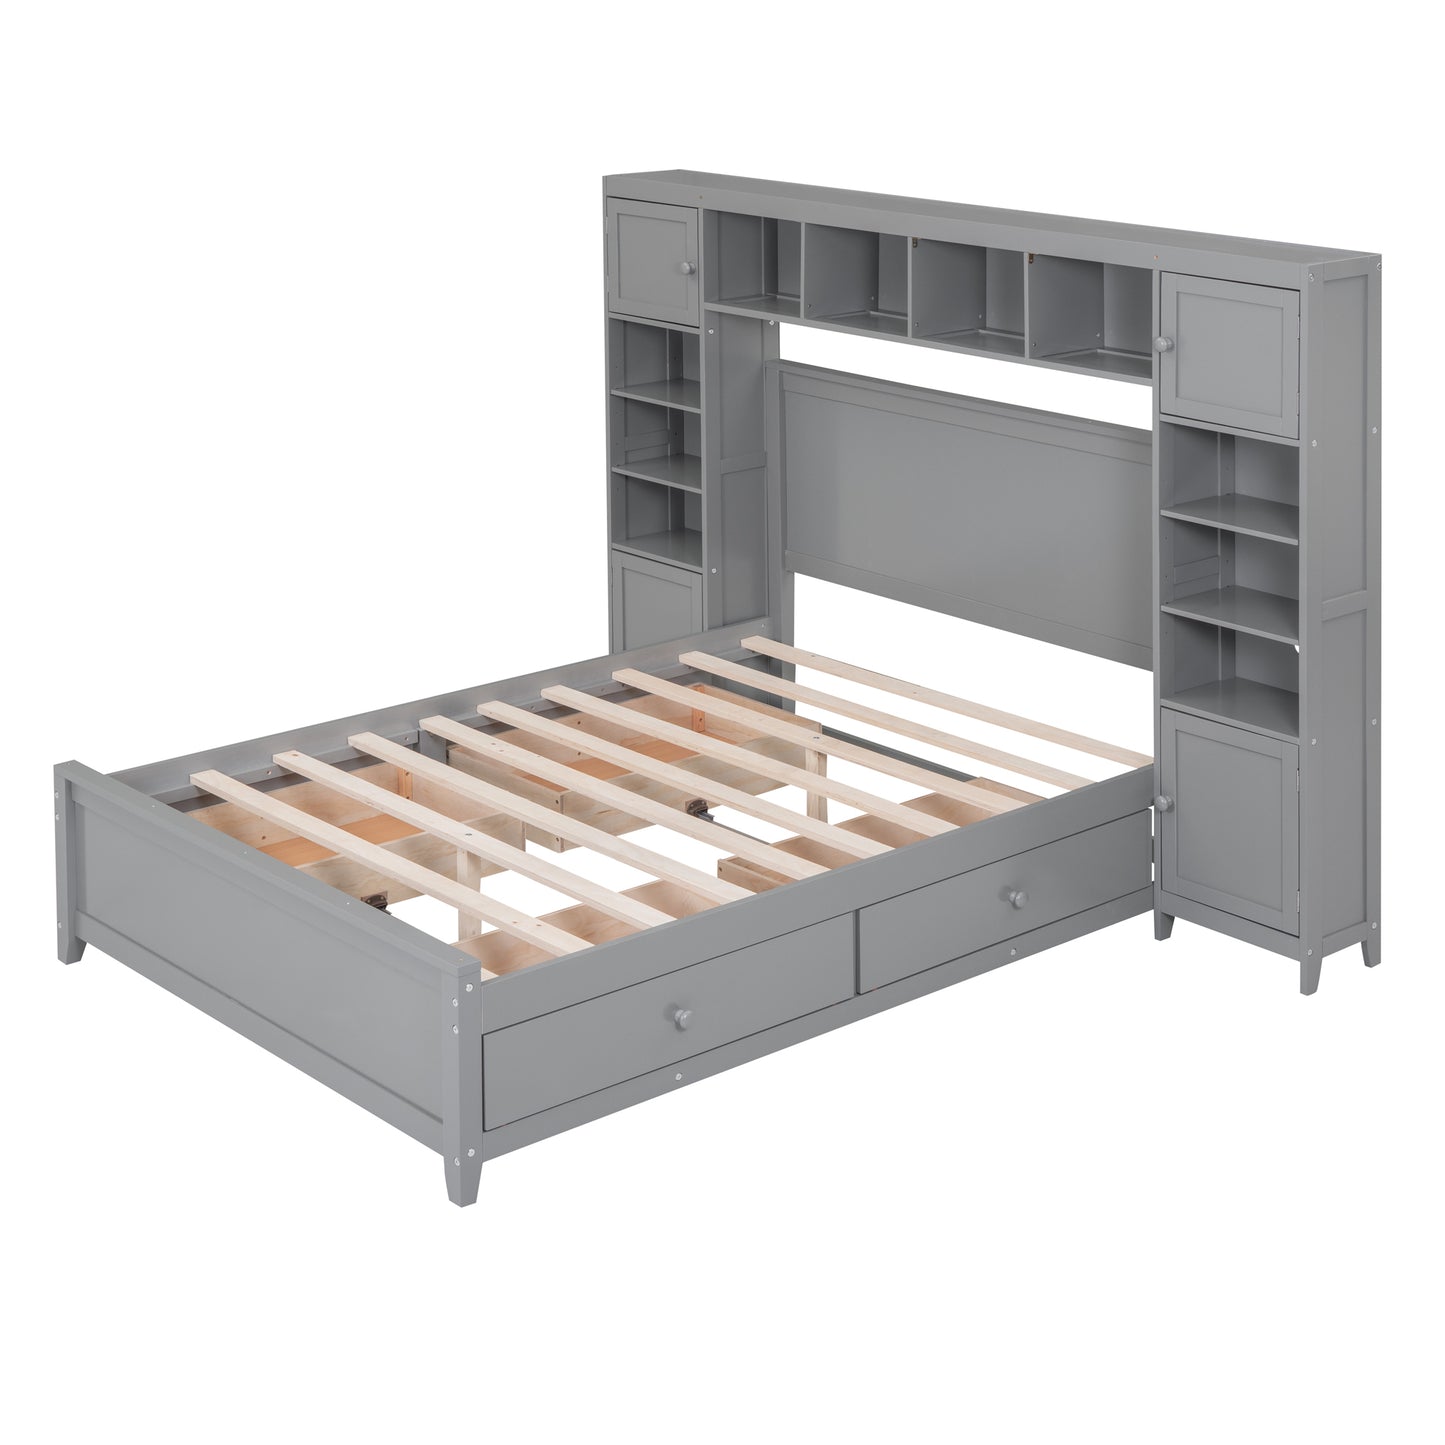 Full Size Wooden Platform Bed With All-in-One Cabinet and Shelf, Gray